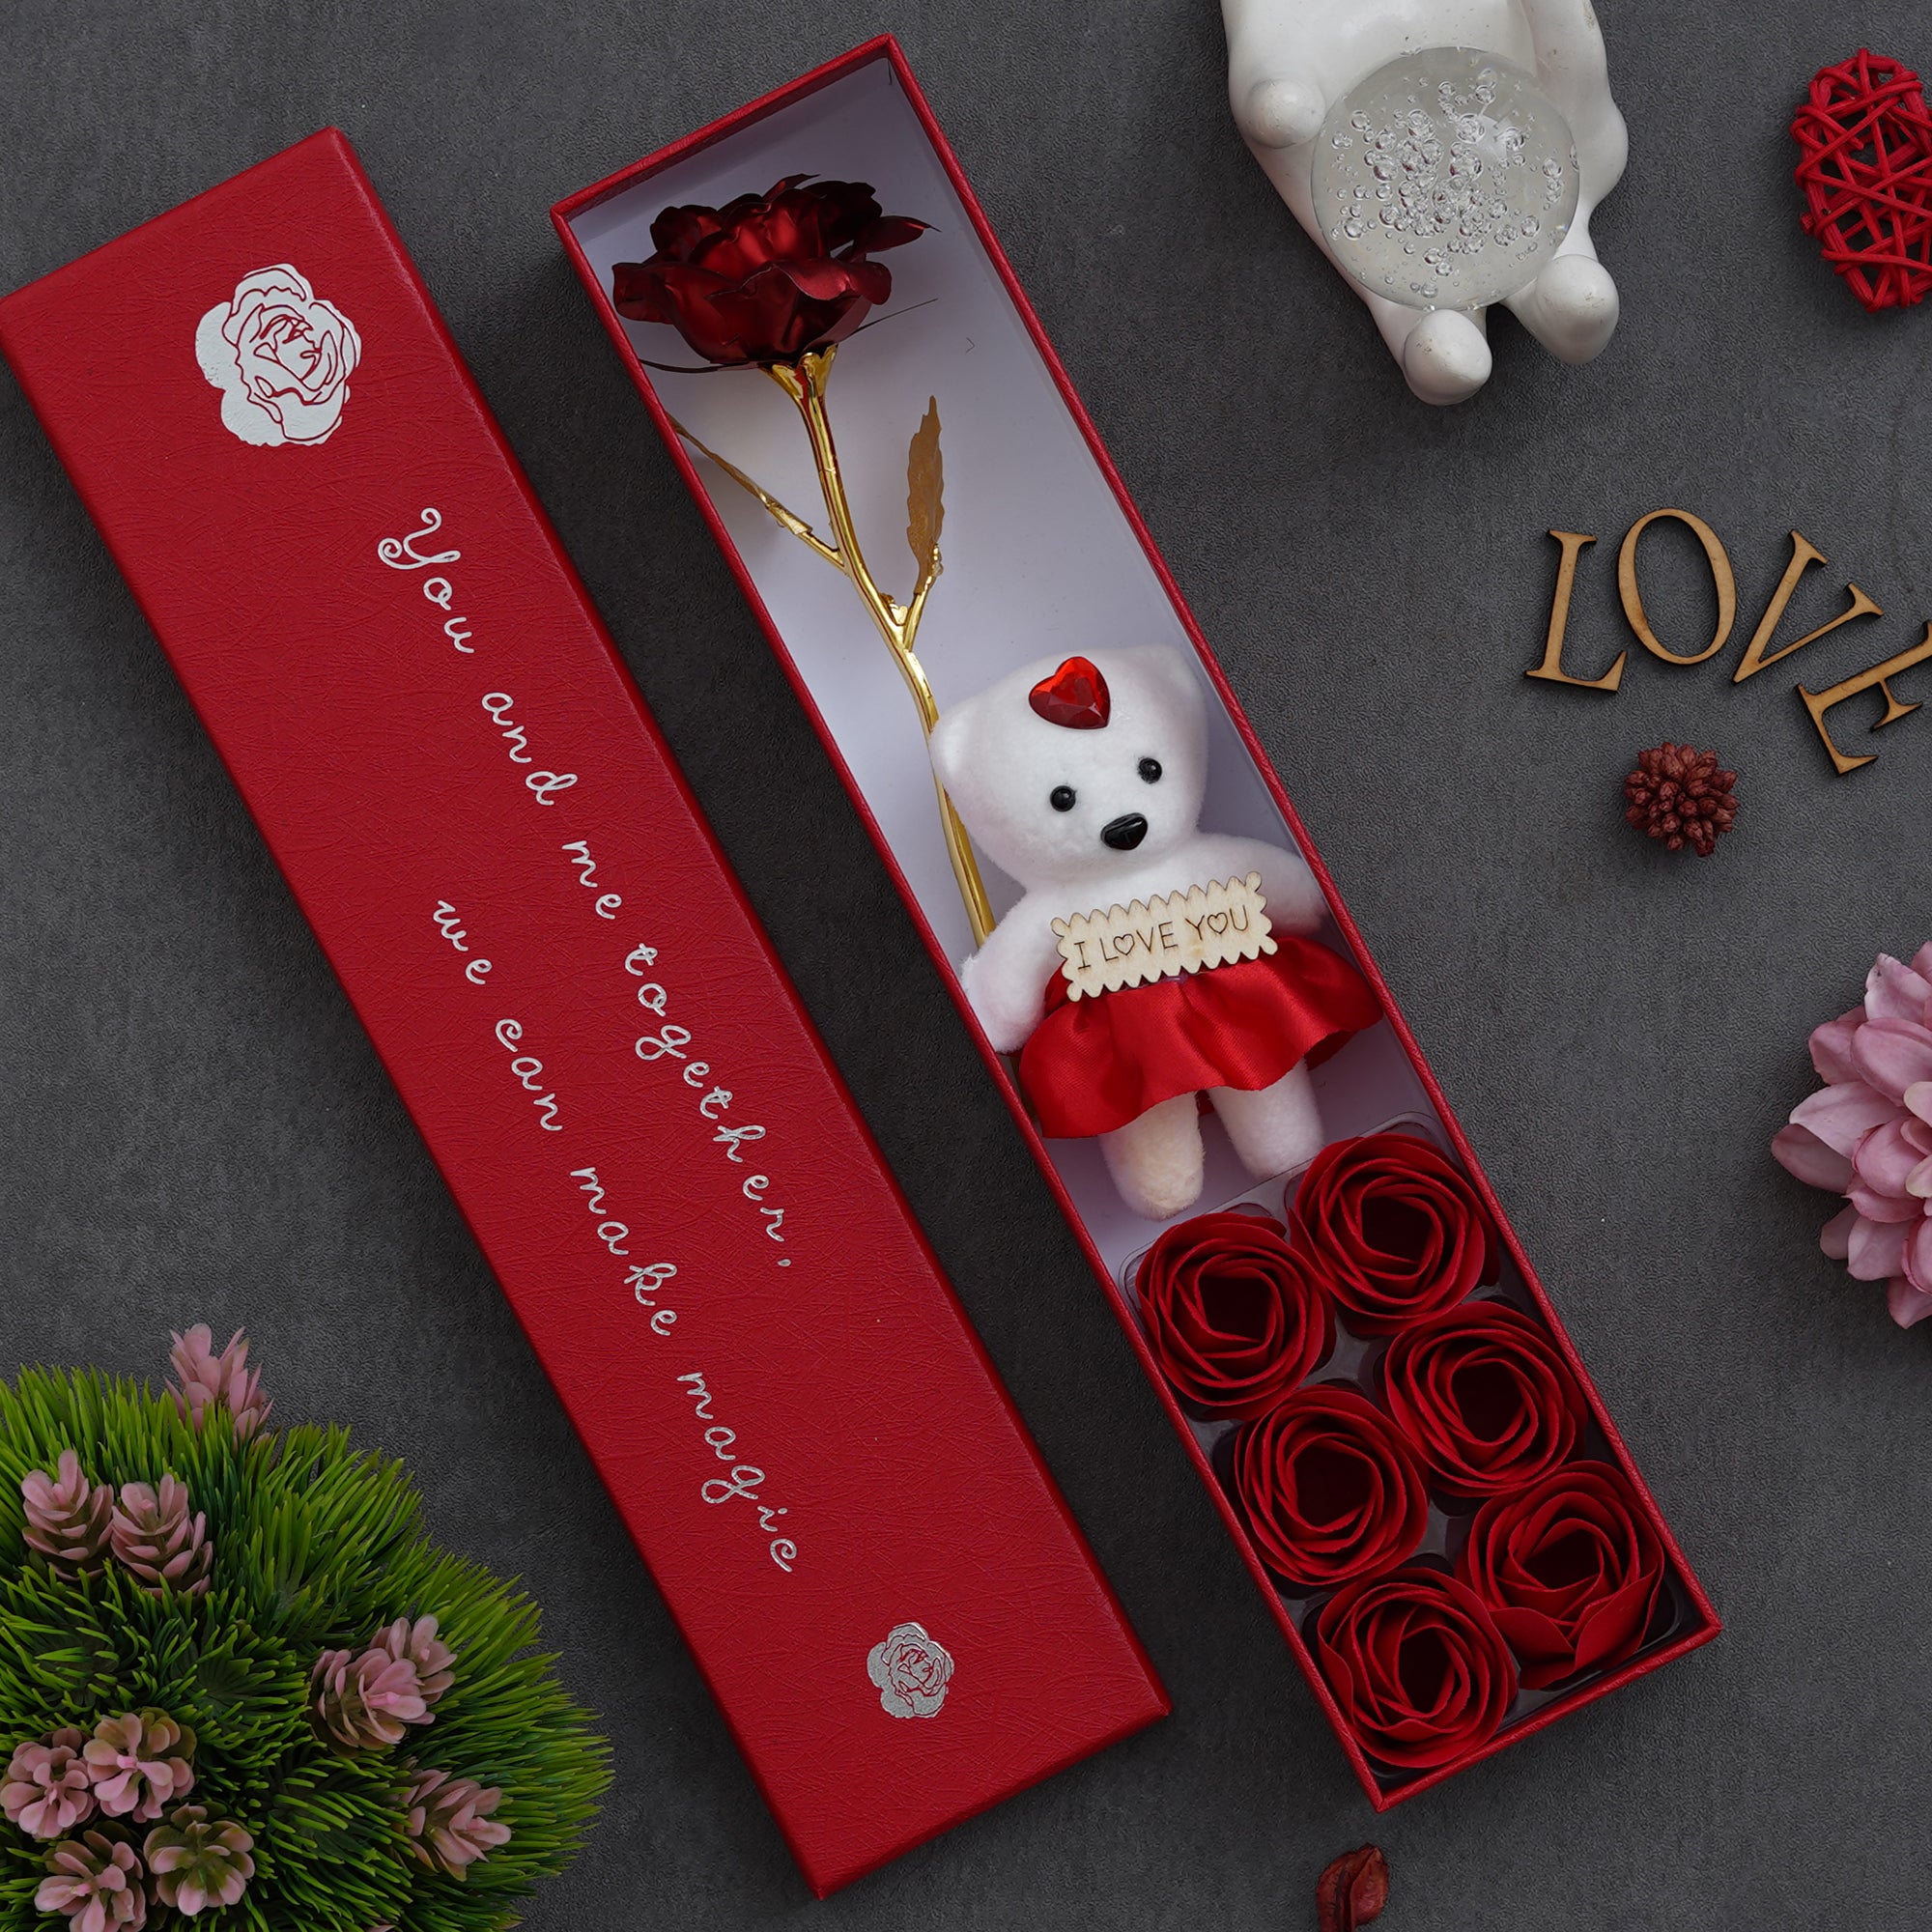 Valentine Combo of Pack of 12 Love Coupons Gift Cards Set, Red Gift Box with Teddy & Roses, "20 Reasons Why I Need You" Printed on Little Hearts Wooden Gift Set 3